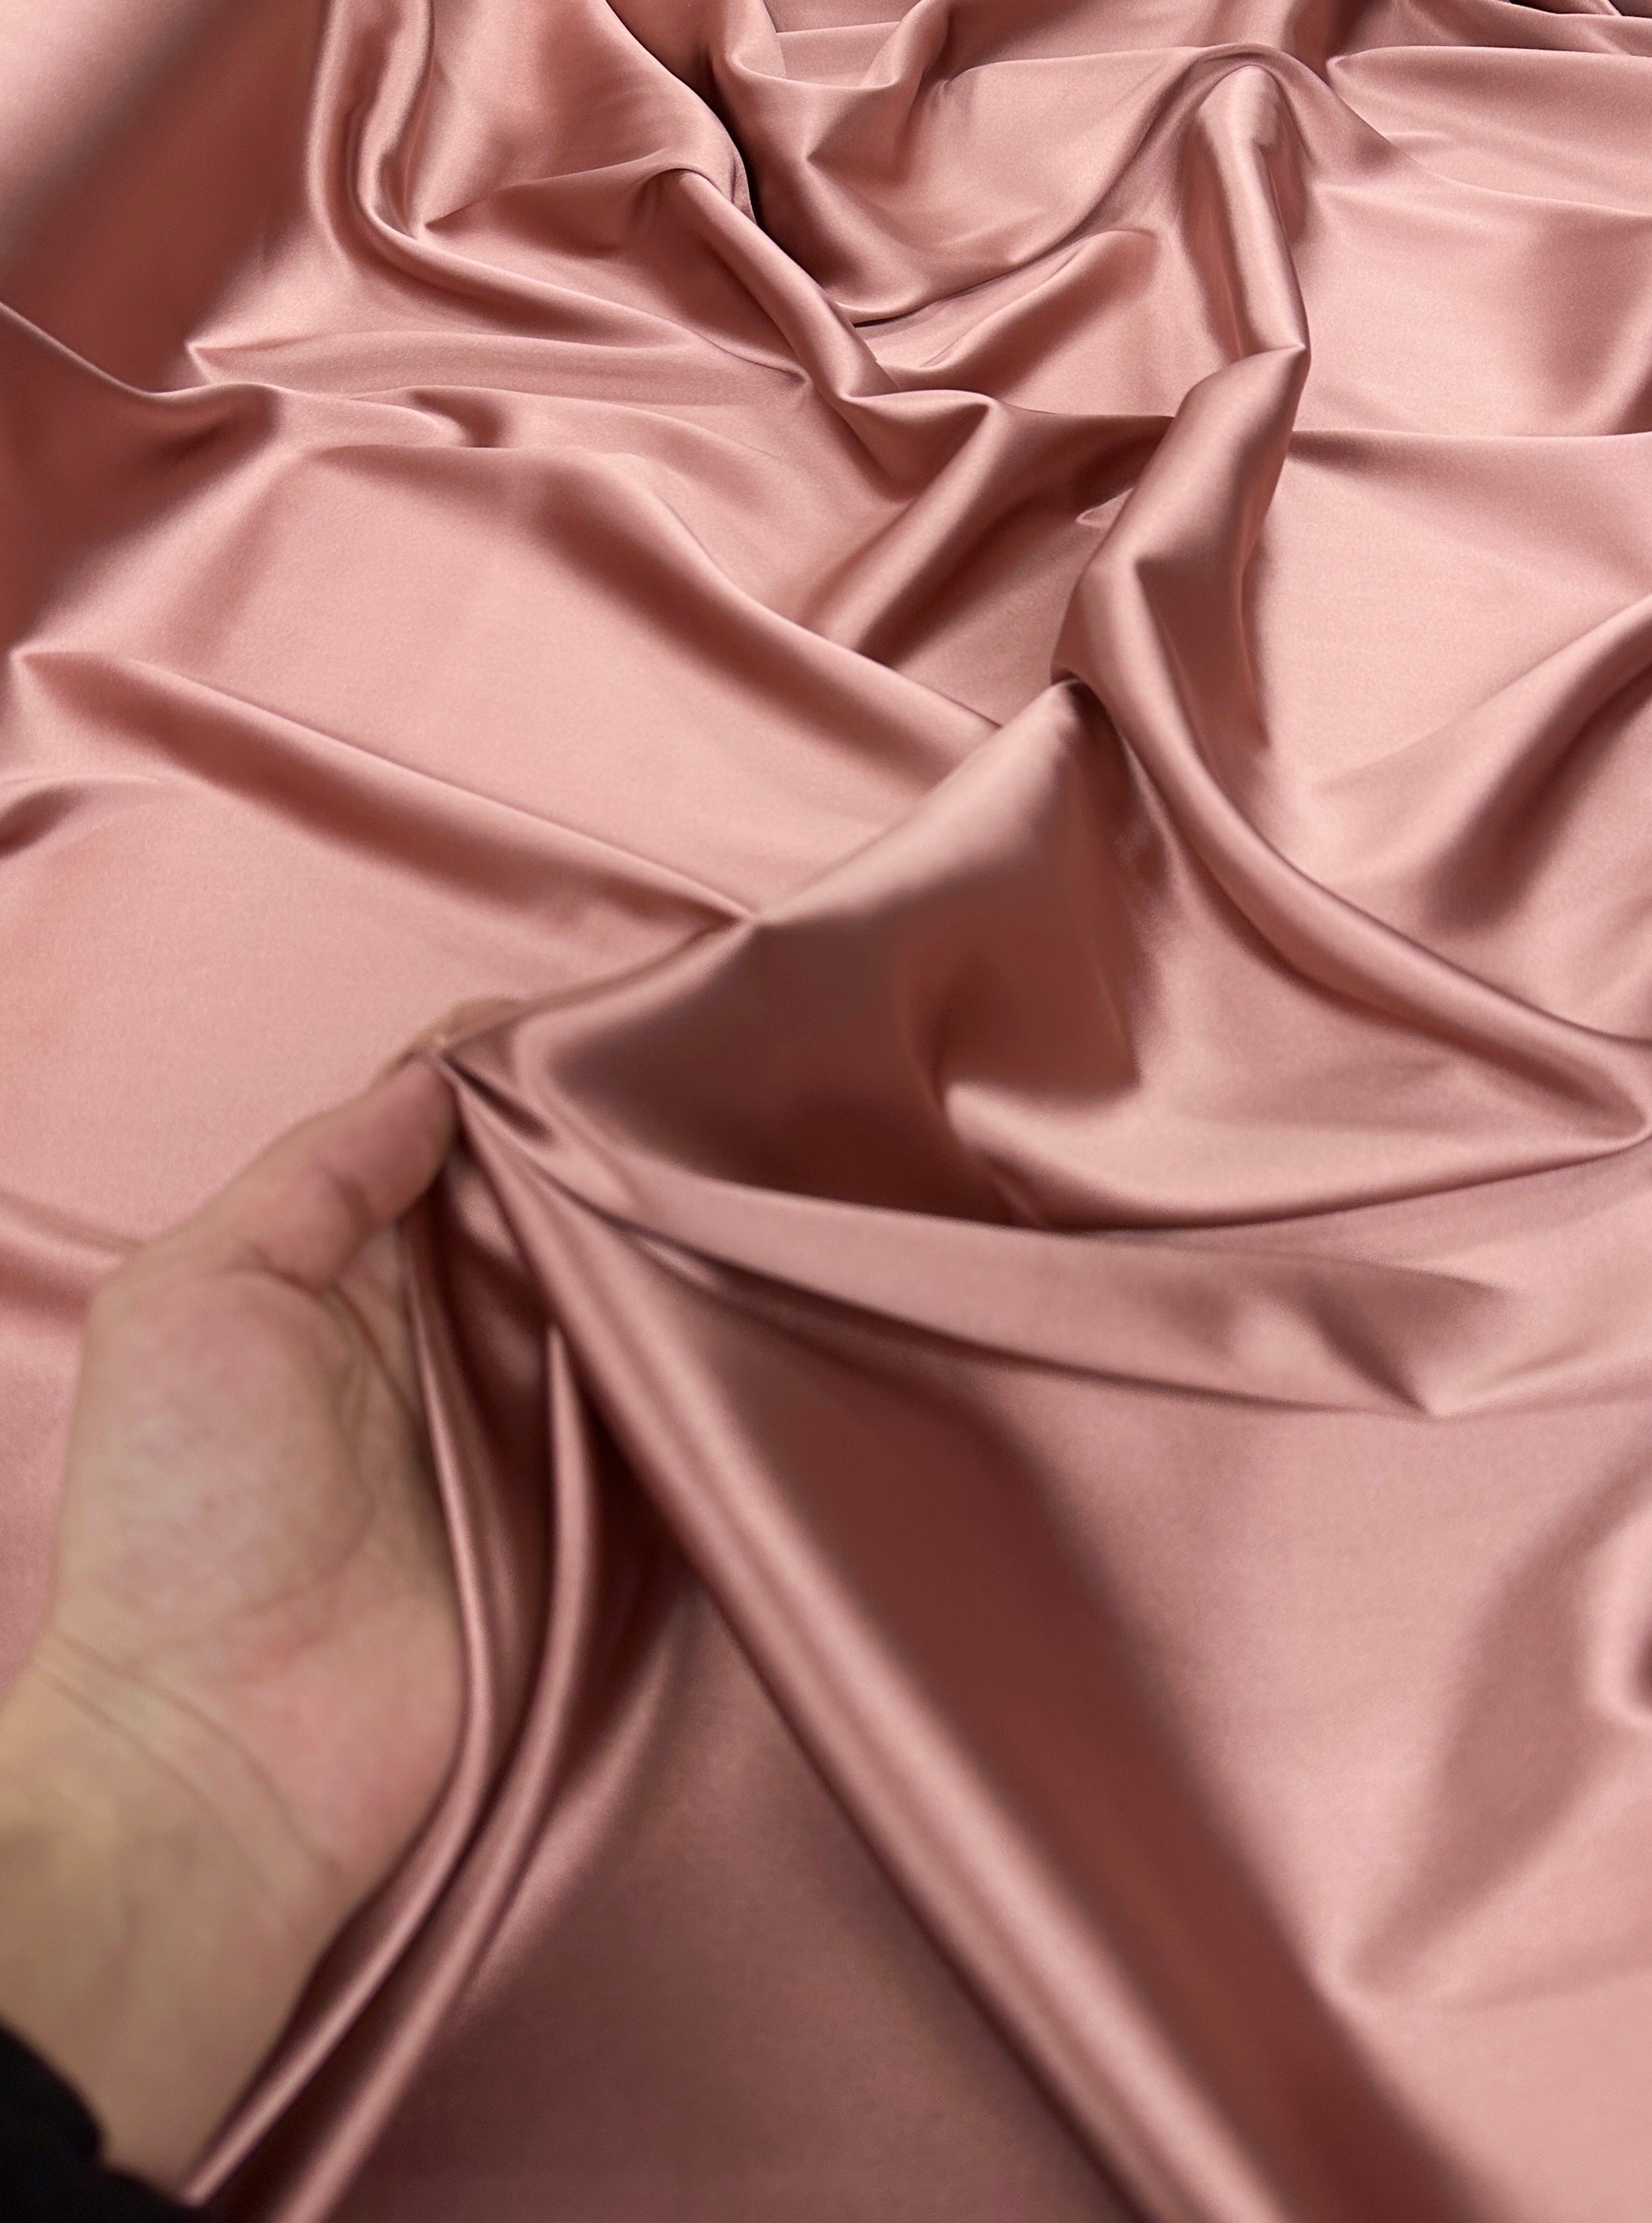 shiny silk fabric, solid silk, solid satin, stretch silk charmeuse, silk fabric by the yard, natural silk, pure silk, 100% pure silk, natural fabric, kiki textiles, online fabric store usa, luxurious fabric, silk satin online, fancy silk, soft silk, smooth silk, 100% natural silk, charmeuse satin, pink natural silk, pink silk, rusty rose natural silk, rusty rose silk, pink natural stretch silk, pink silk, baby pink silk, pink silk satin, light pink silk